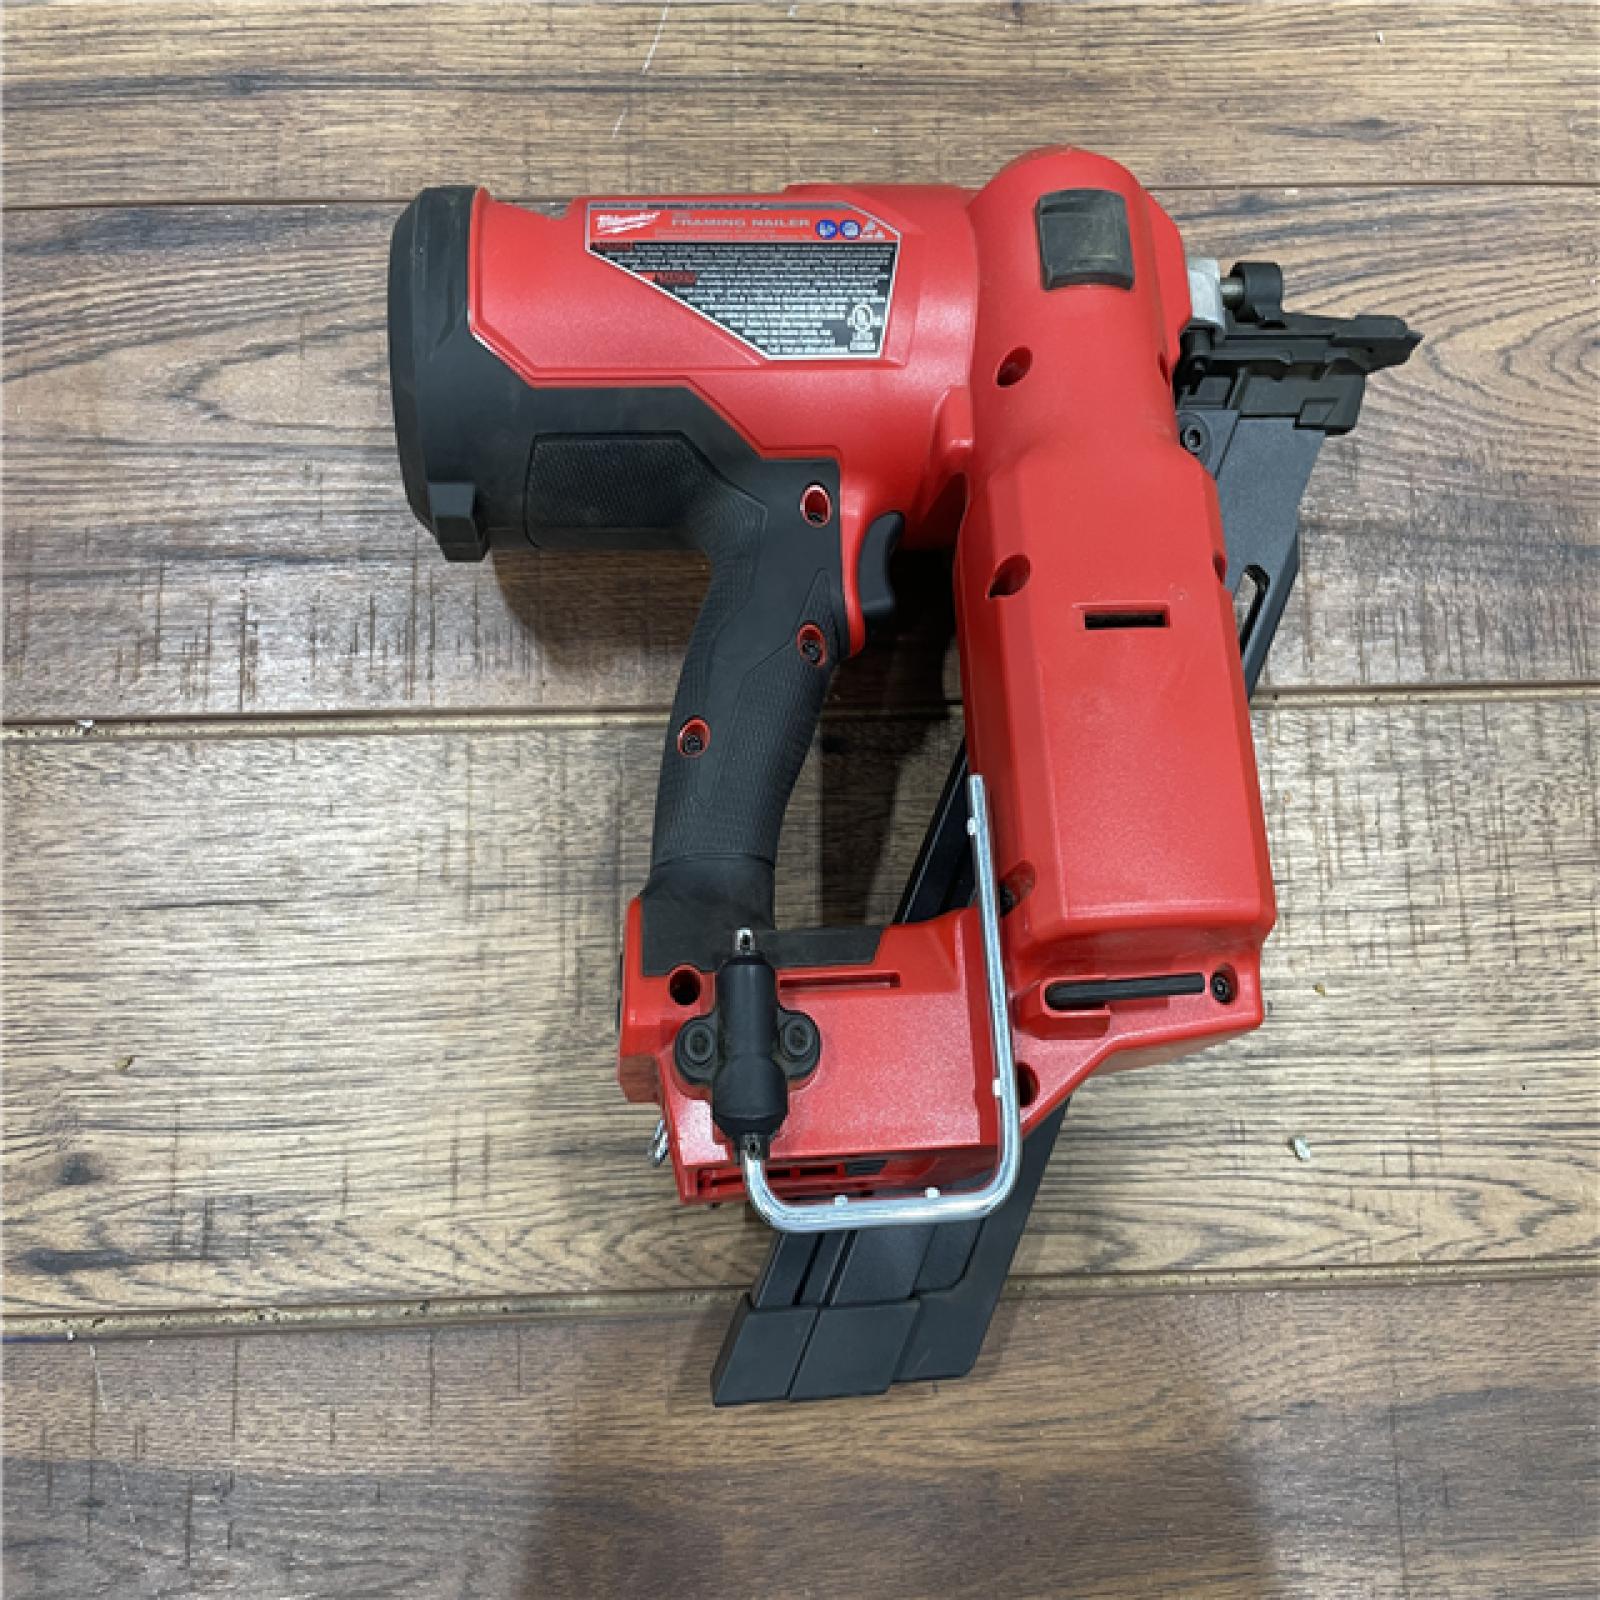 AS-IS Milwaukee M18 FUEL 3-1/2 in. 18-Volt 30-Degree Lithium-Ion Brushless Cordless Framing Nailer (Tool-Only)